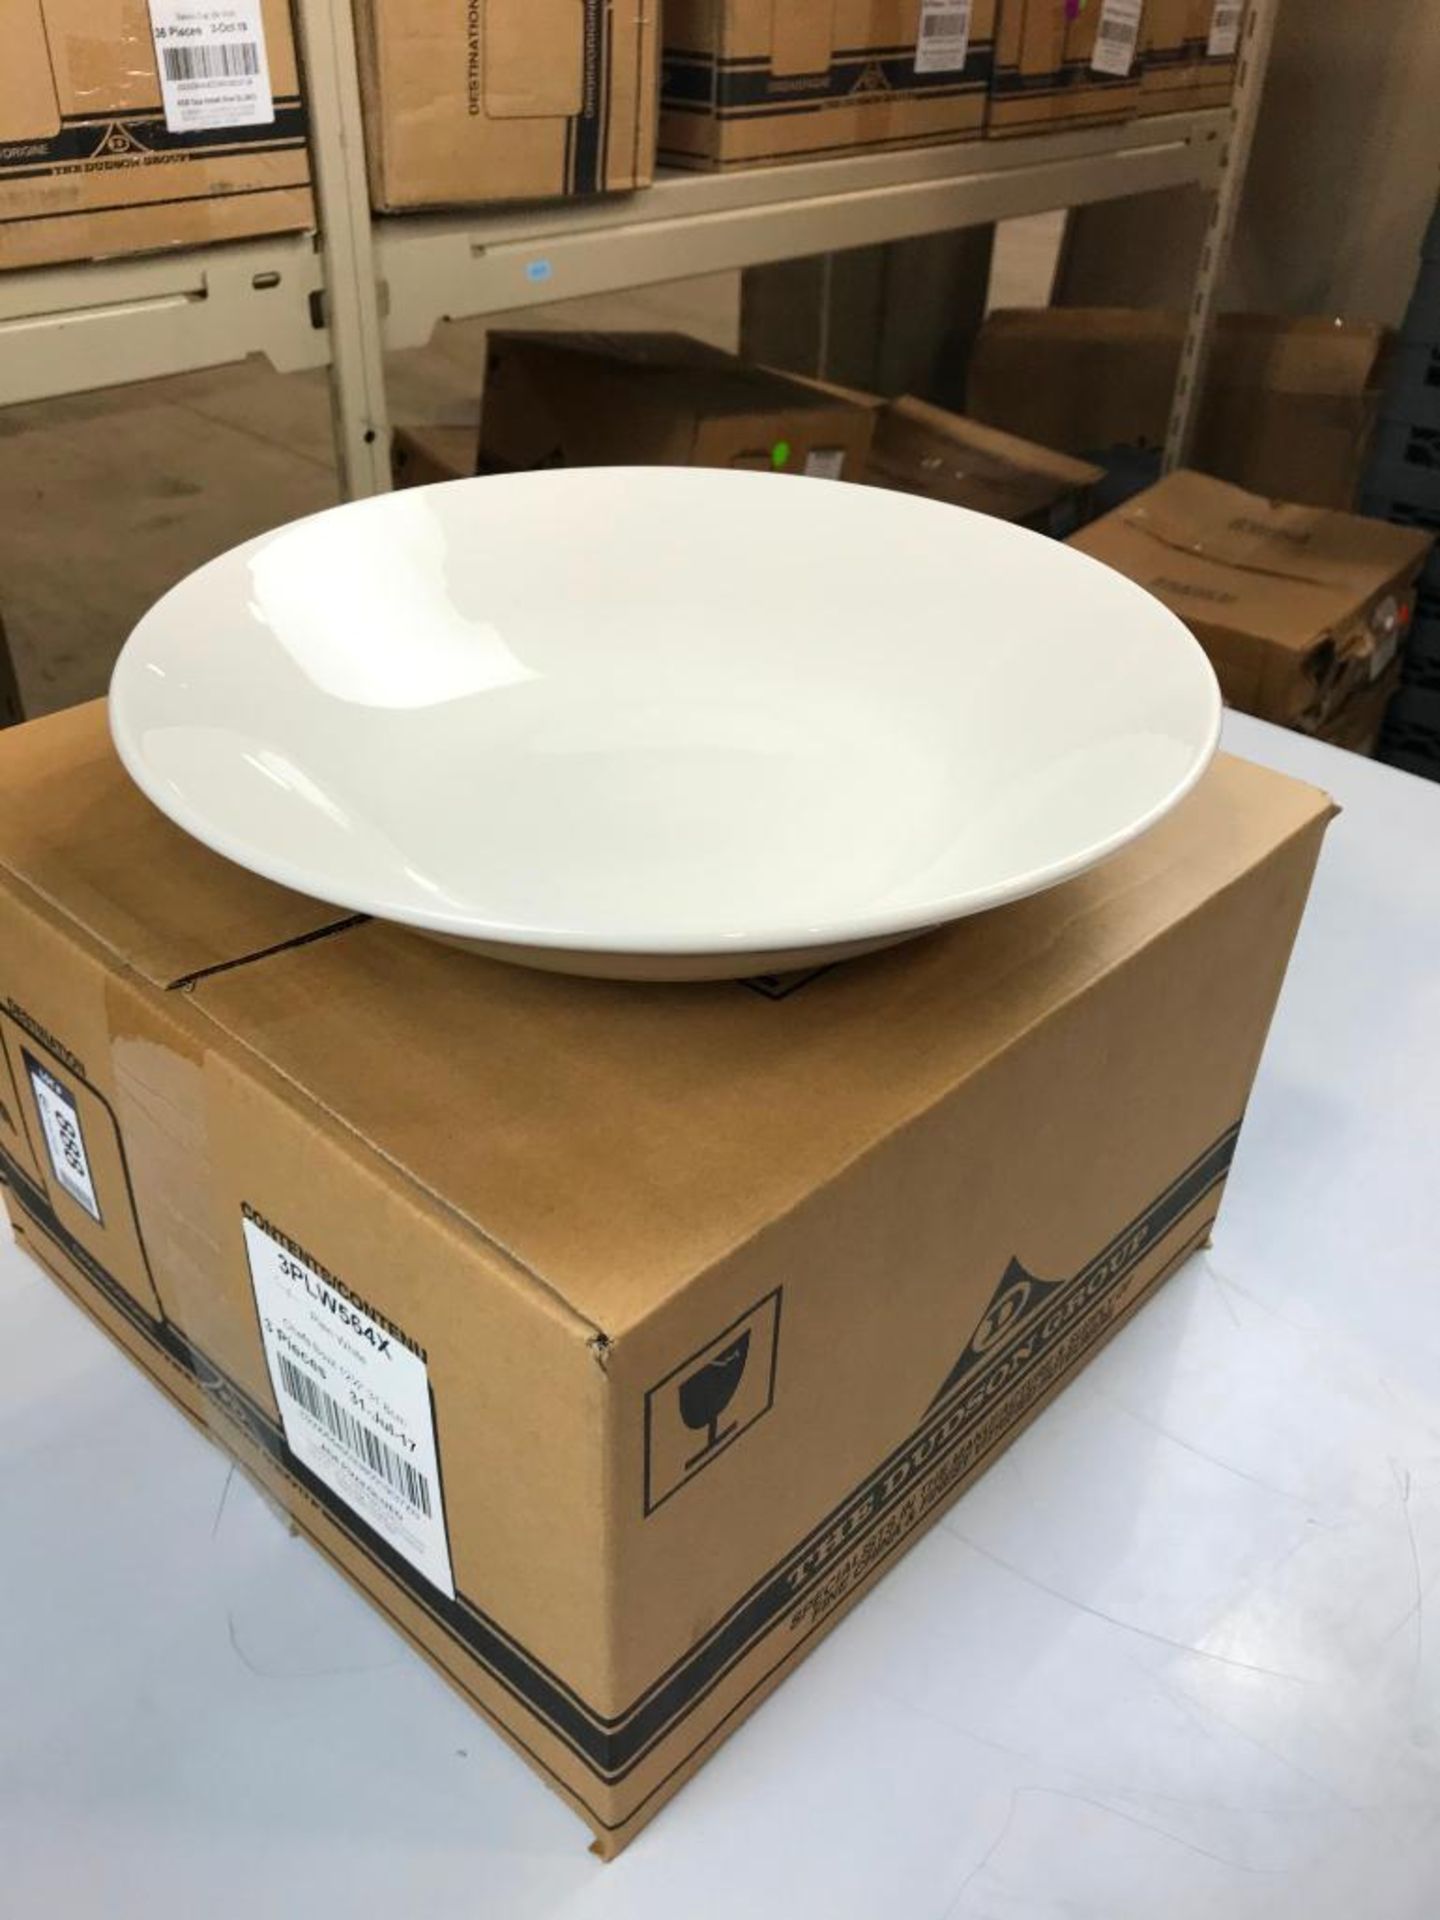 DUDSON CLASSIC CHEF'S BOWL 12.5" - 3/CASE, MADE IN ENGLAND